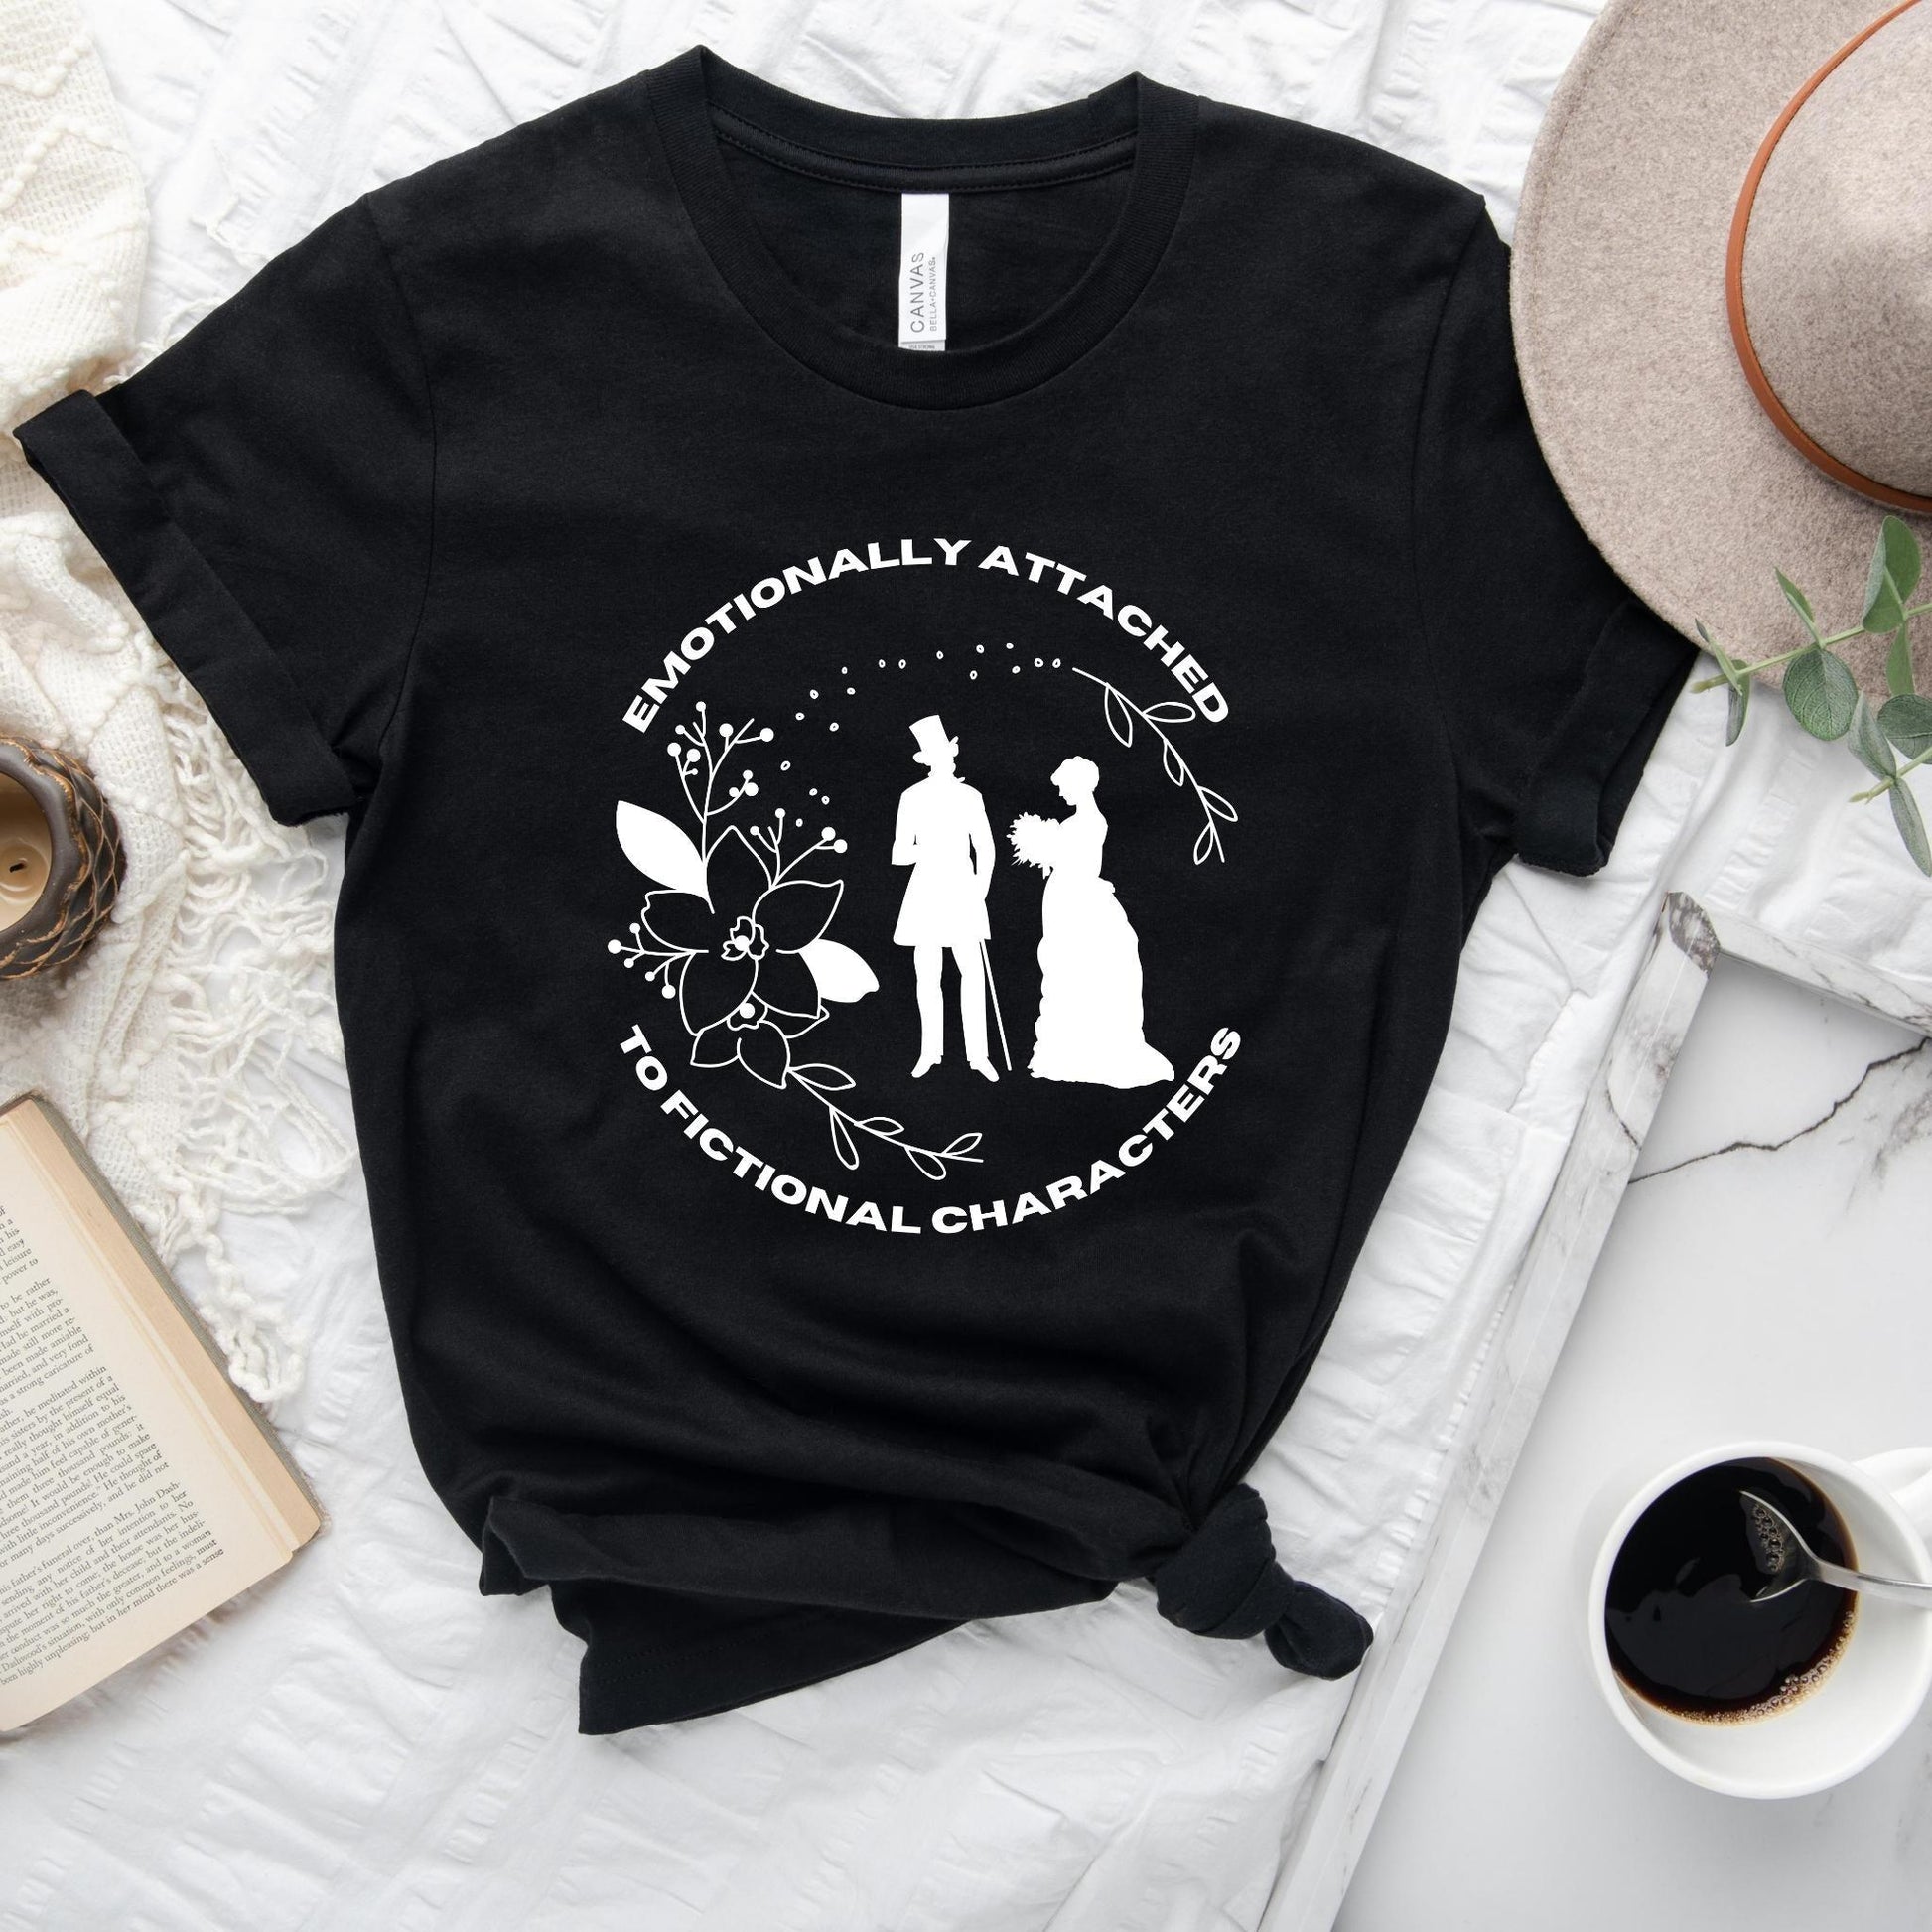 Emotionally Attached To Fictional Characters - Unisex T-Shirt - WellReadBabes